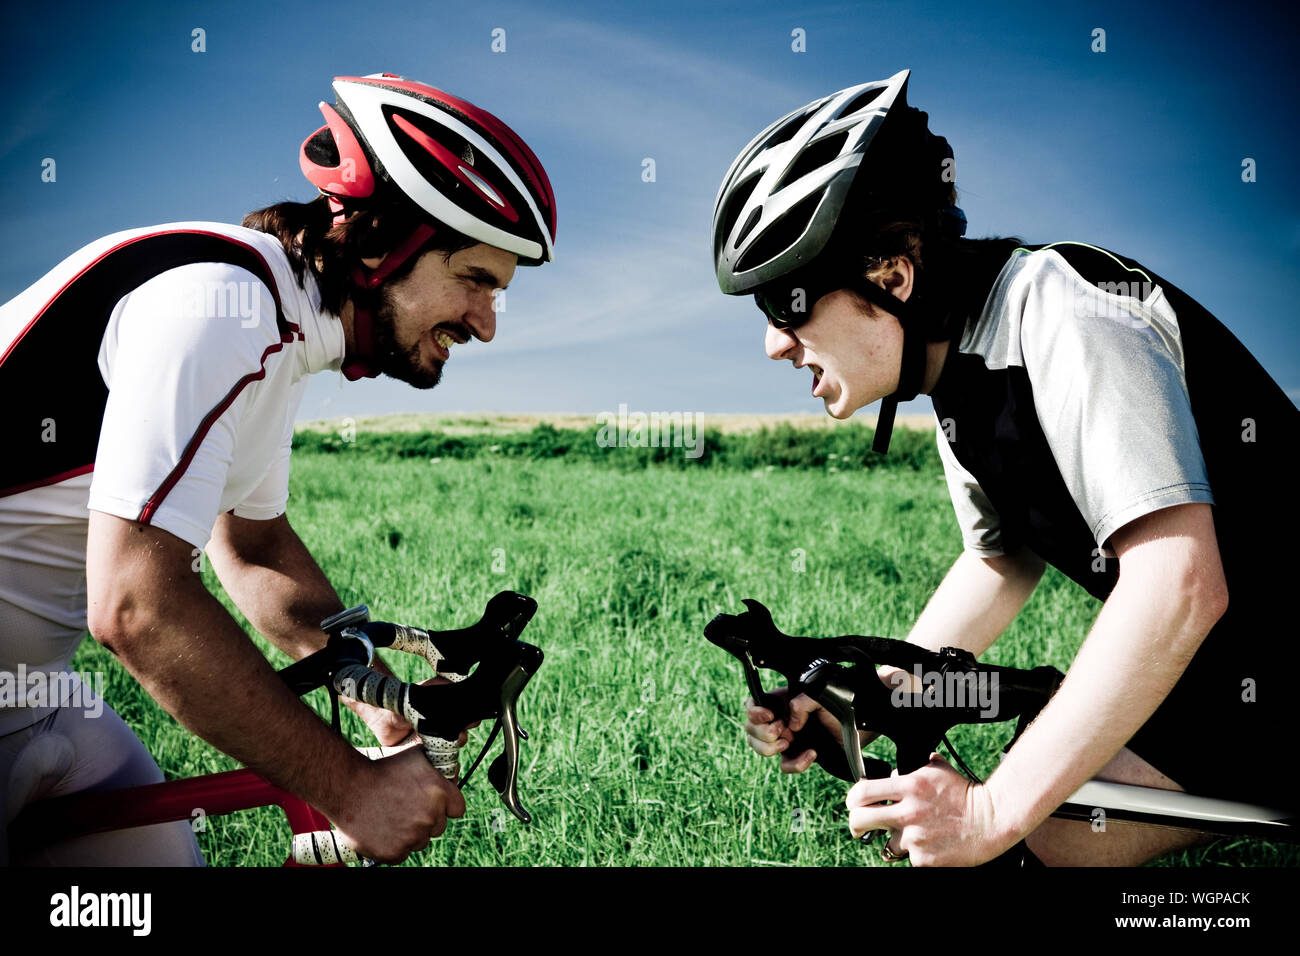 Mid Adult Men With Bicycles On Grassy Field Against Sky Stock Photo